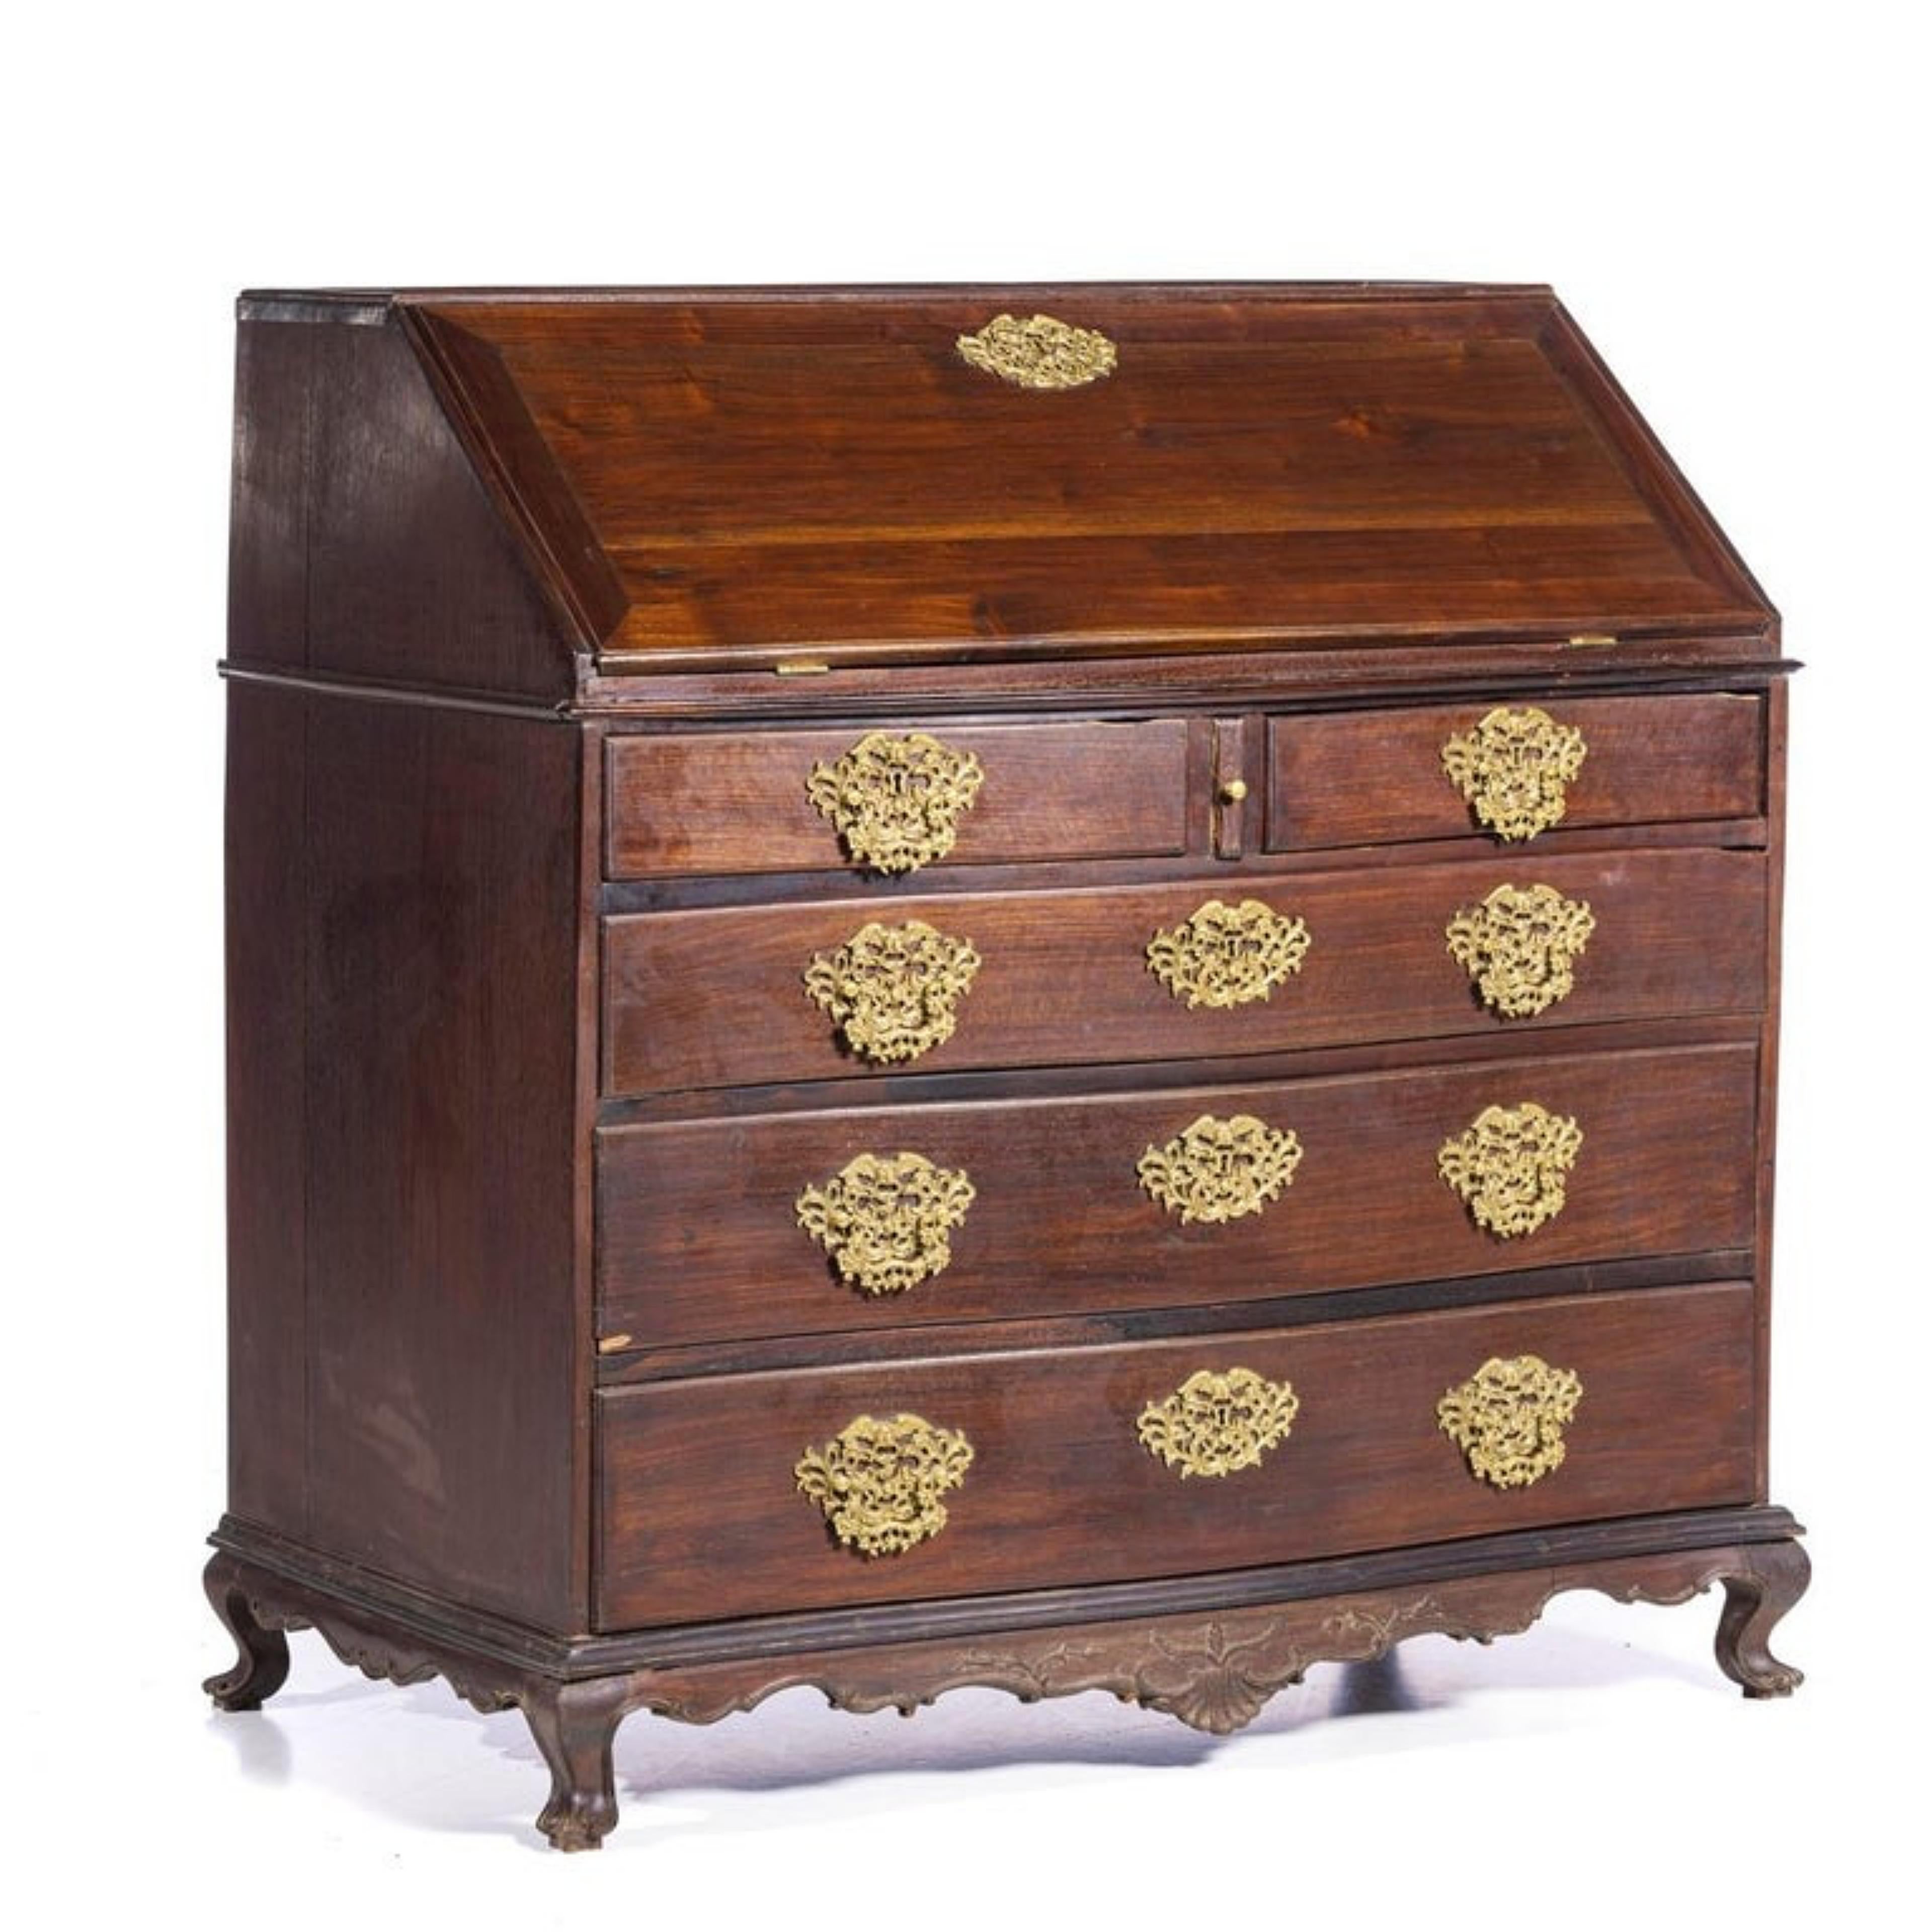 Chest of Drawers
Portuguese 18th Century

in vinhatic wood.
With three drawers and folding top, interior with central hatch and six drawers.
Defects.
Dim.: 120 x 114 x 64 cm.